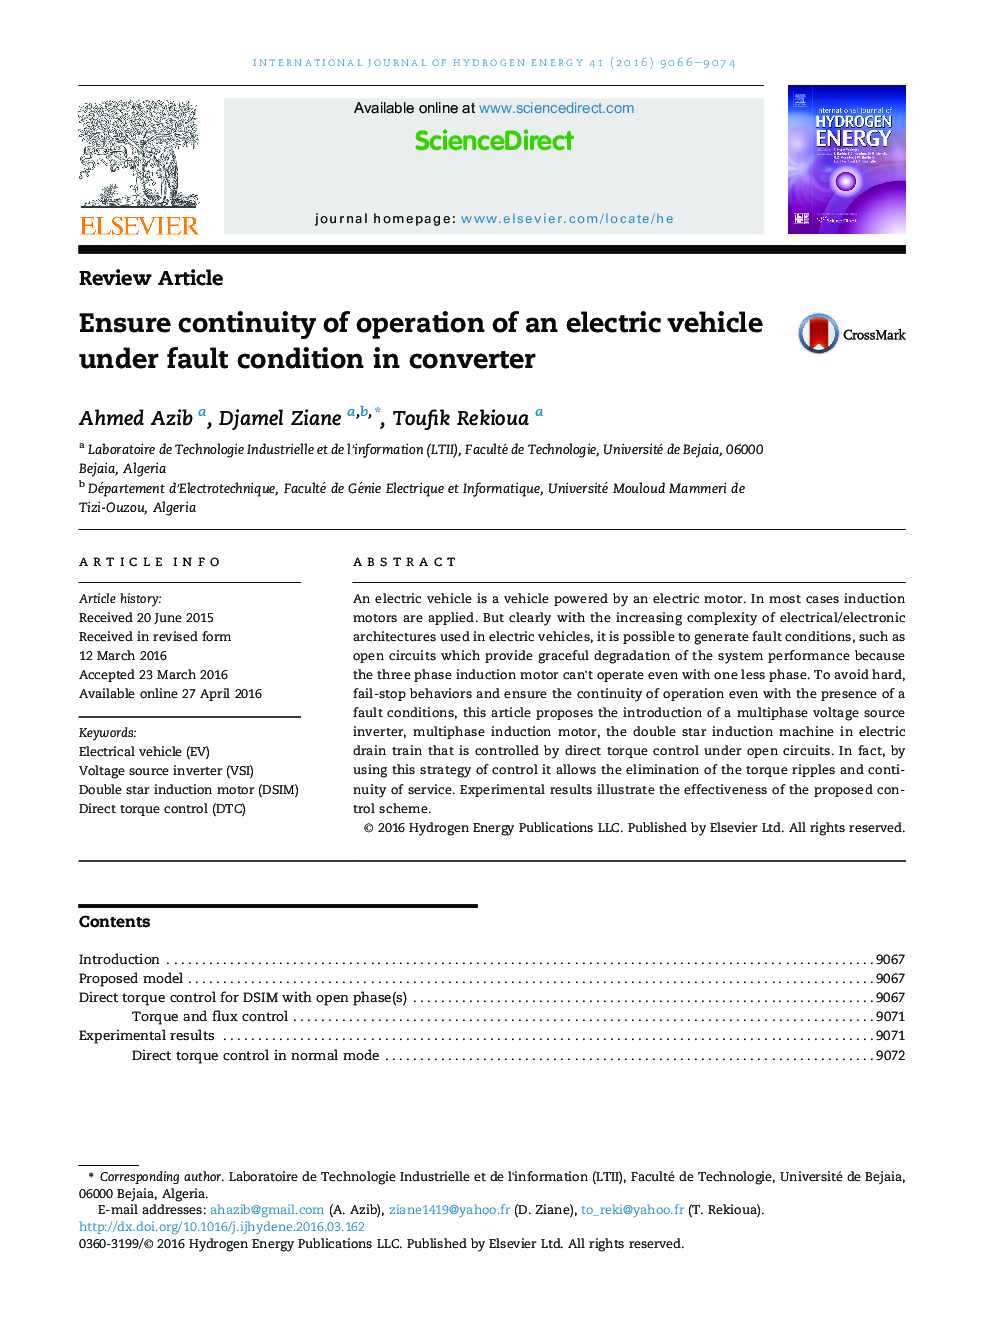 Ensure continuity of operation of an electric vehicle under fault condition in converter